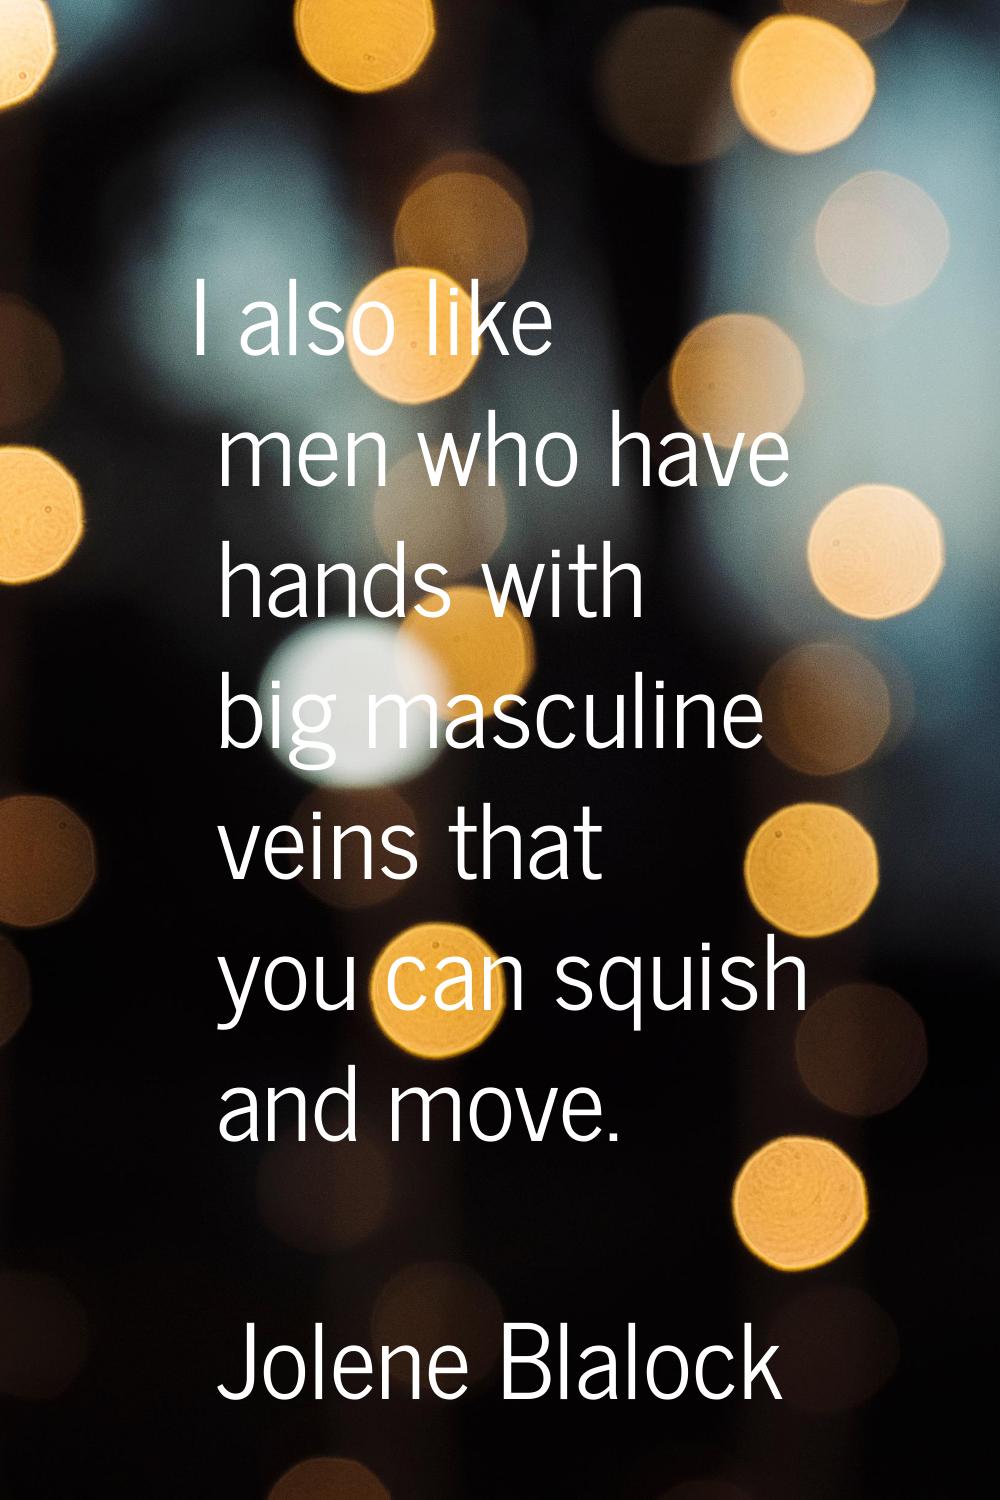 I also like men who have hands with big masculine veins that you can squish and move.